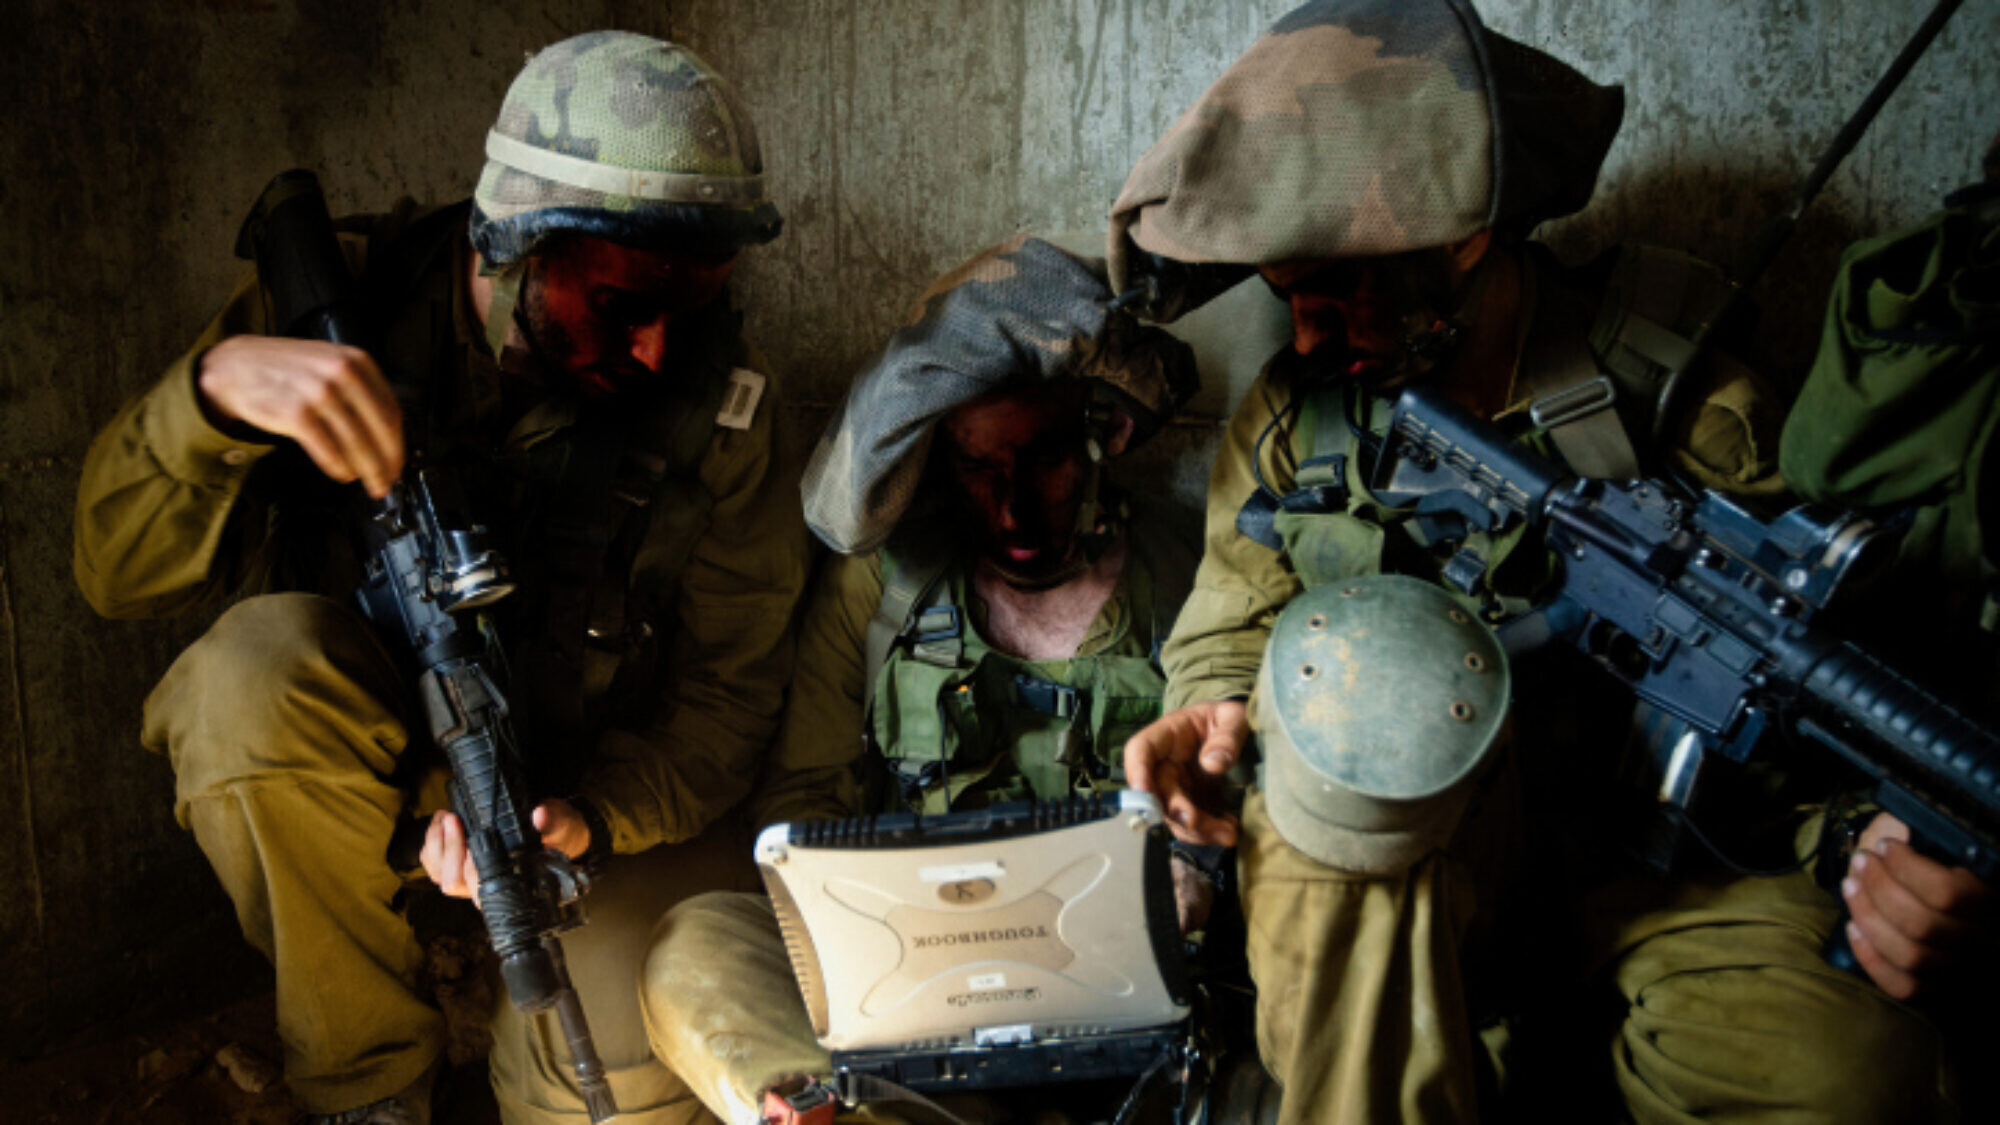 Members of IDF Unite 8200's operational arm training in the field. Sep 11 2012. Photo by Moshe Shai/Flash90.